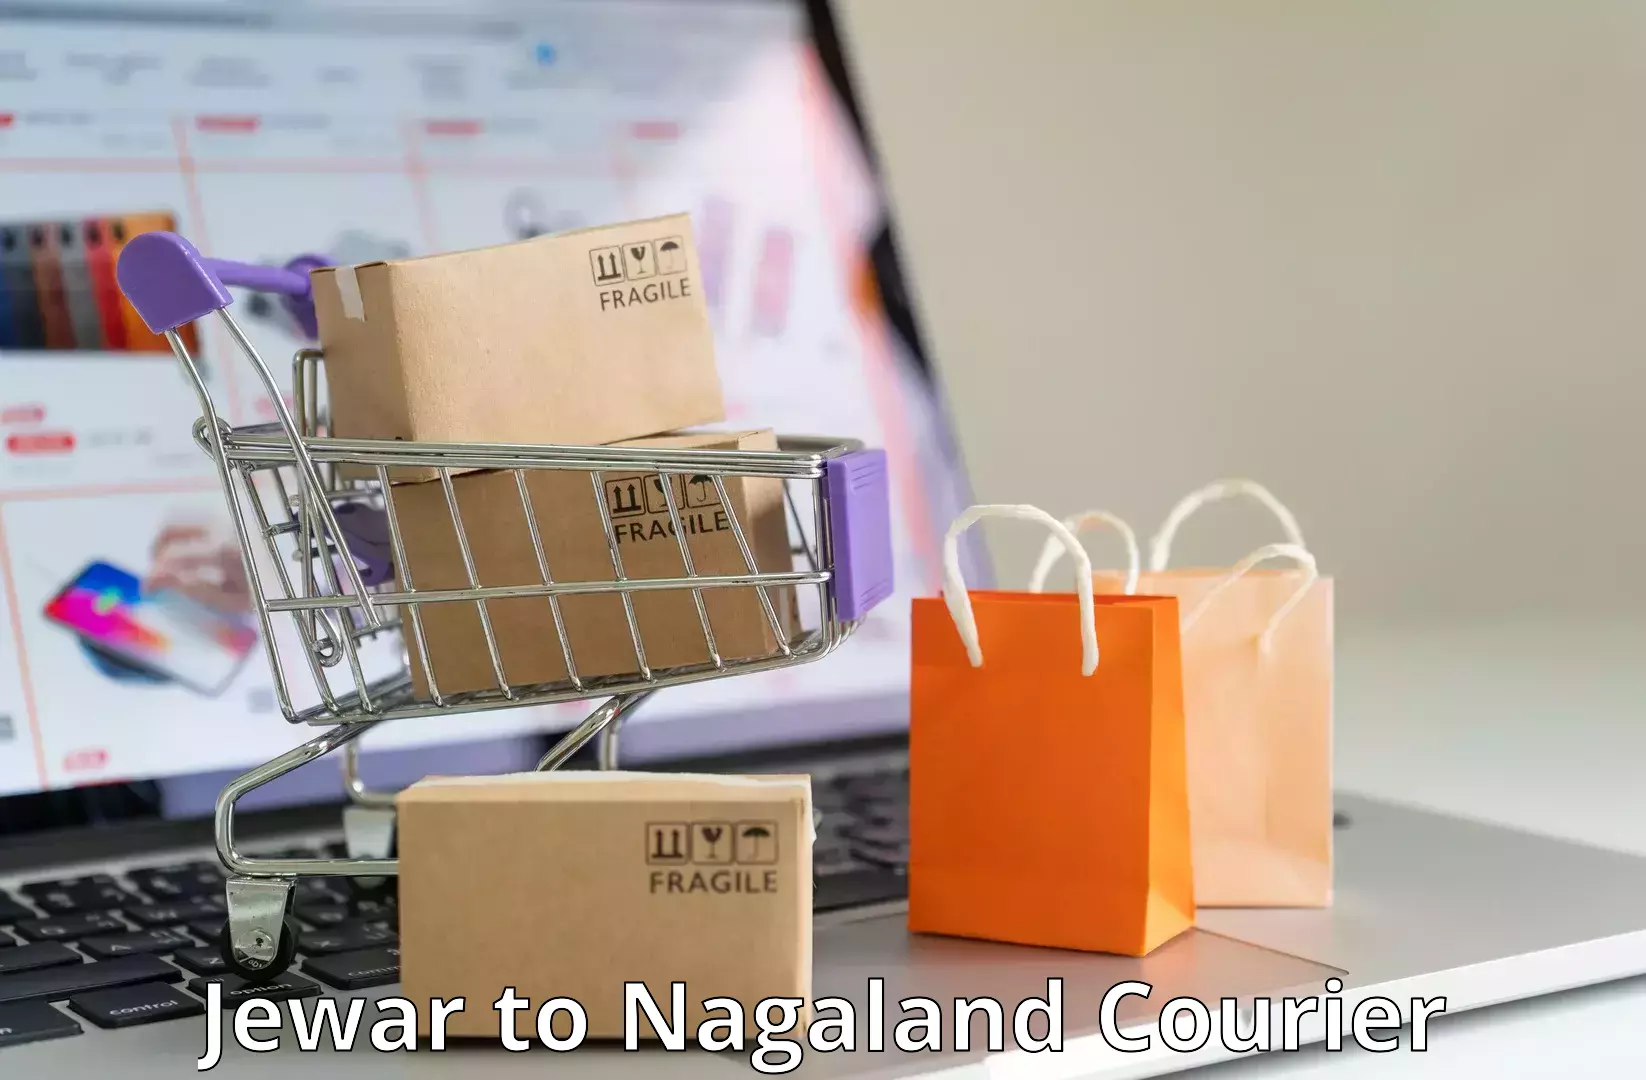 Medical delivery services Jewar to NIT Nagaland